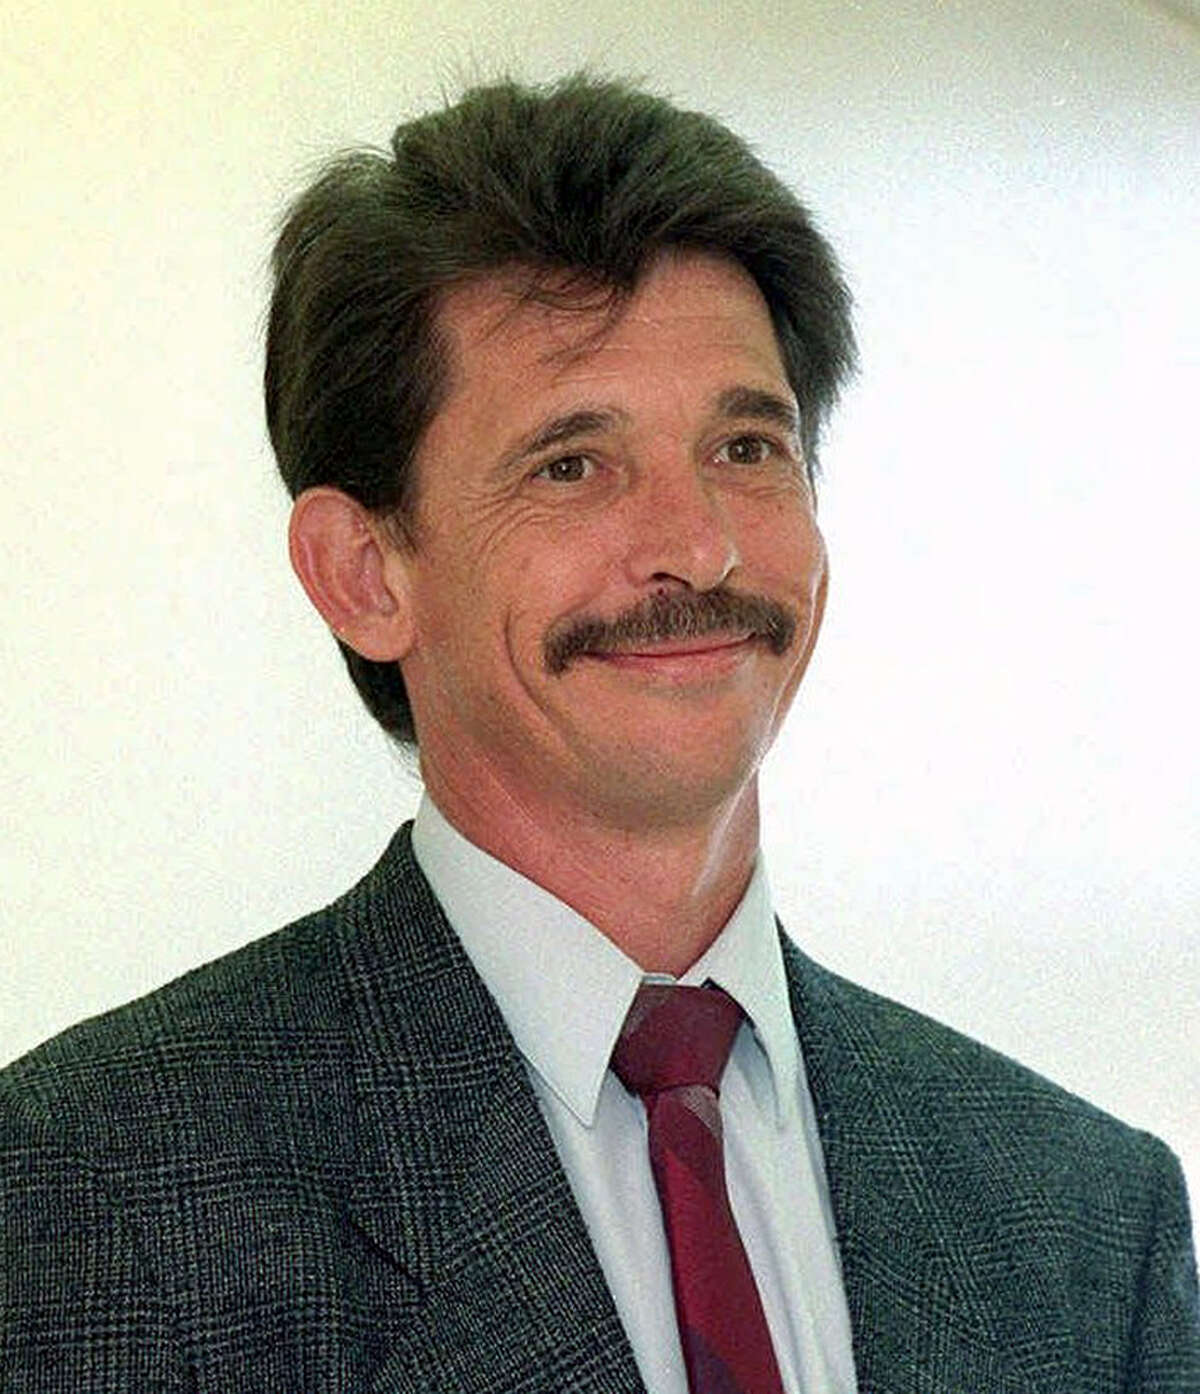 An undated file photograph of San Antonio Express-News Mexico City correspondent Philip True. An unconfirmed report says the the body of True, age 50, has been found in a remote canyon in Mexico. True had been missing for almost two weeks.